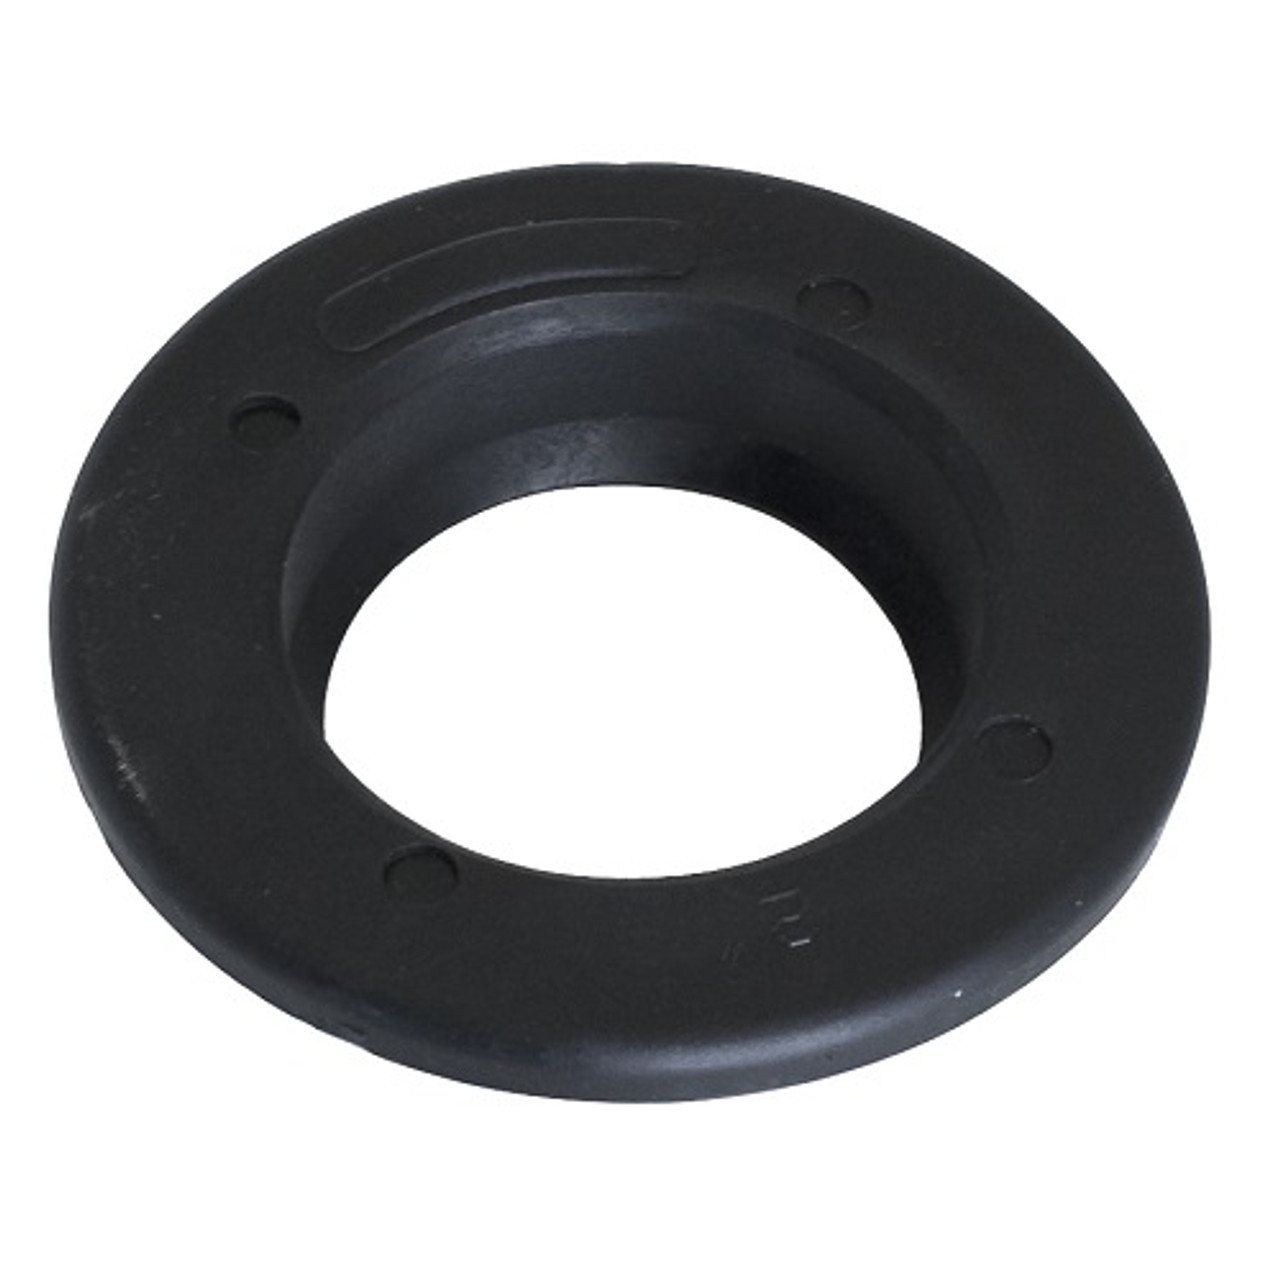 2" Rubber Grommet The Drainage Products Store